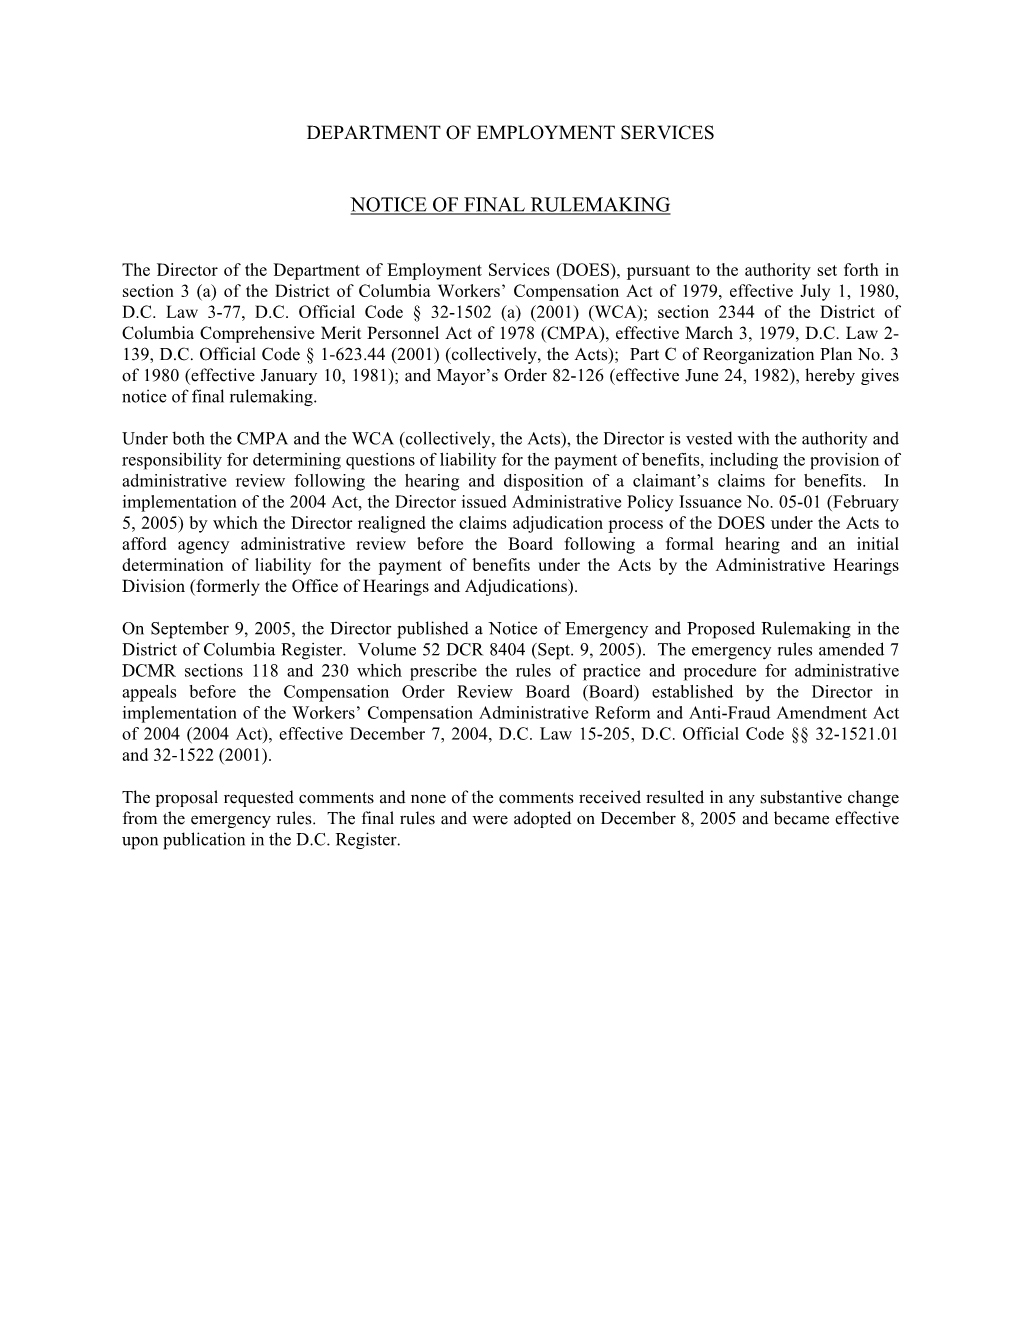 Notice of Final Rulemaking